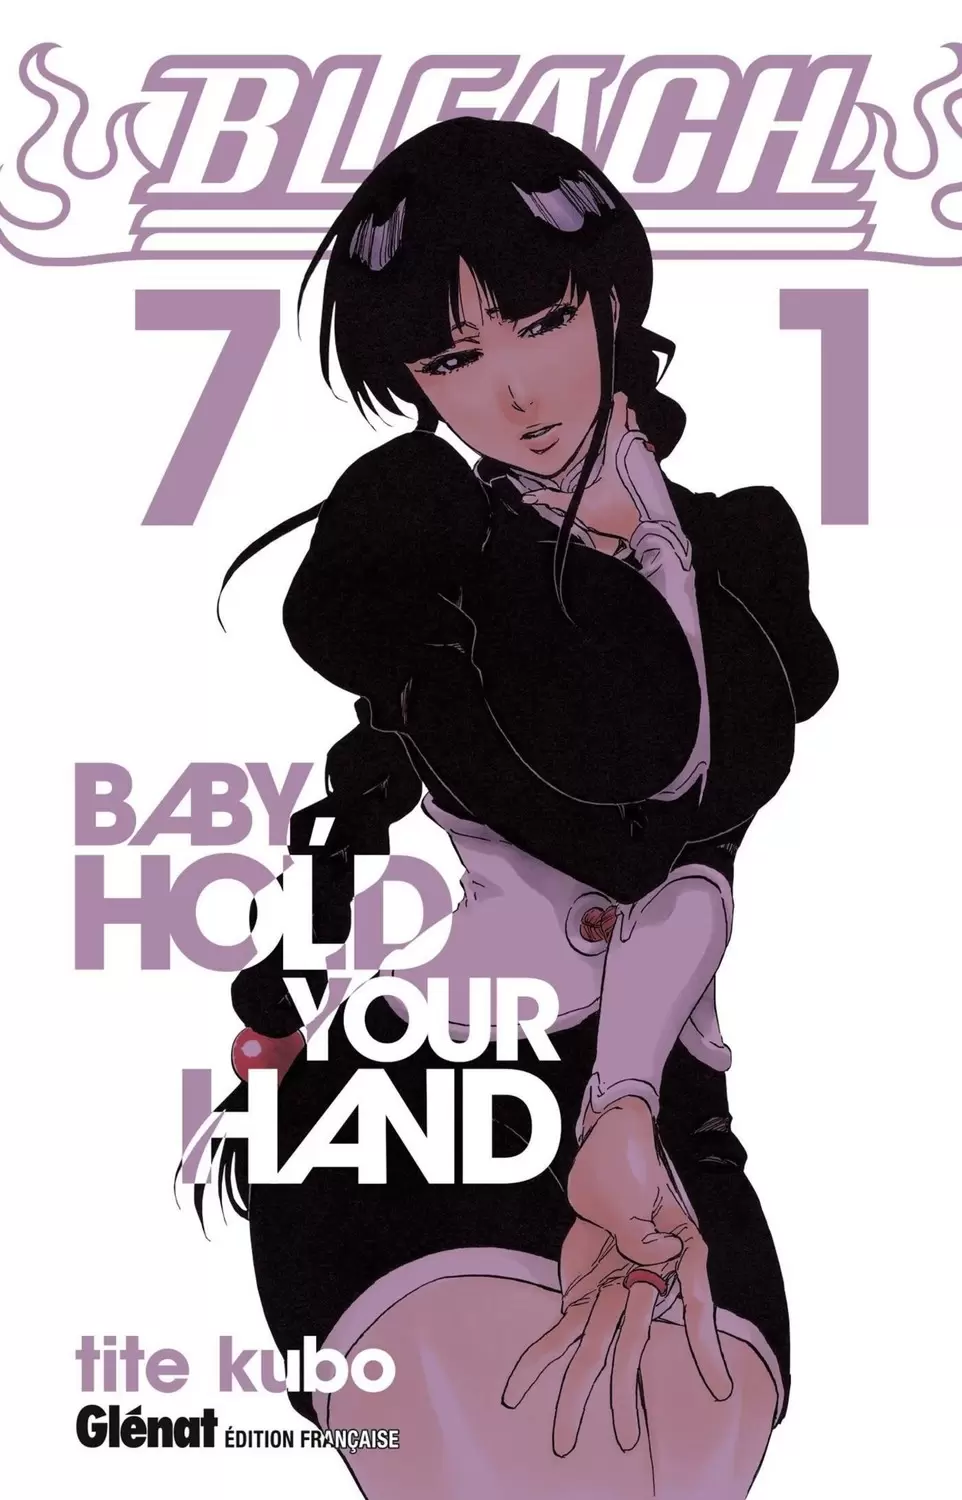 Bleach - 71. Baby, Hold your Hand